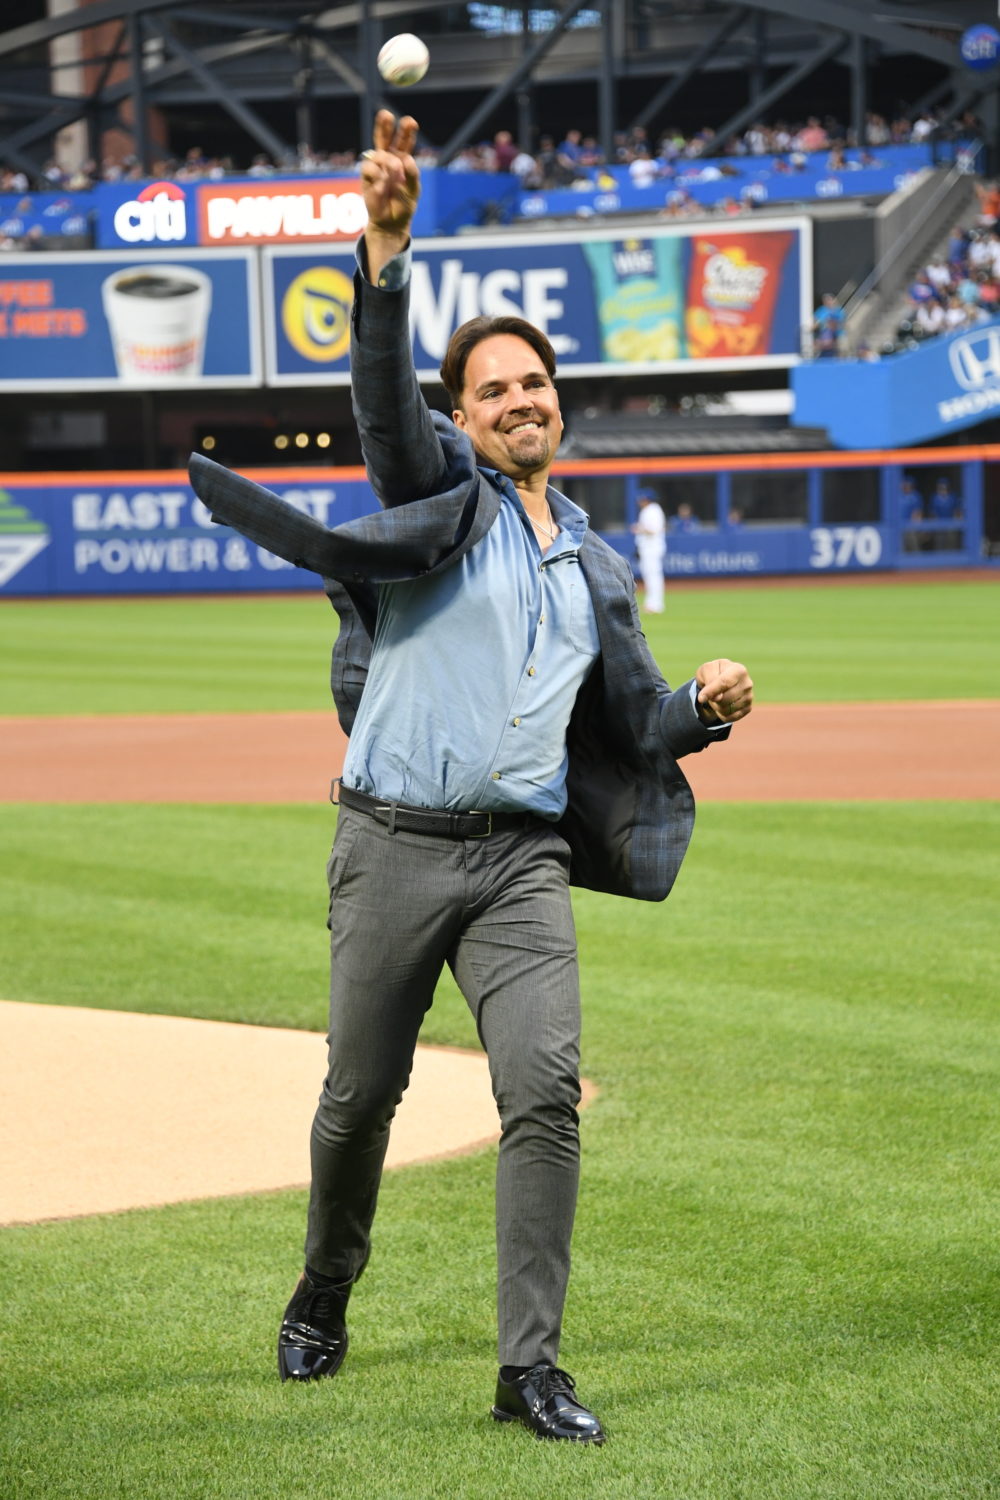 Mike Piazza Throws First Pitch in 2018